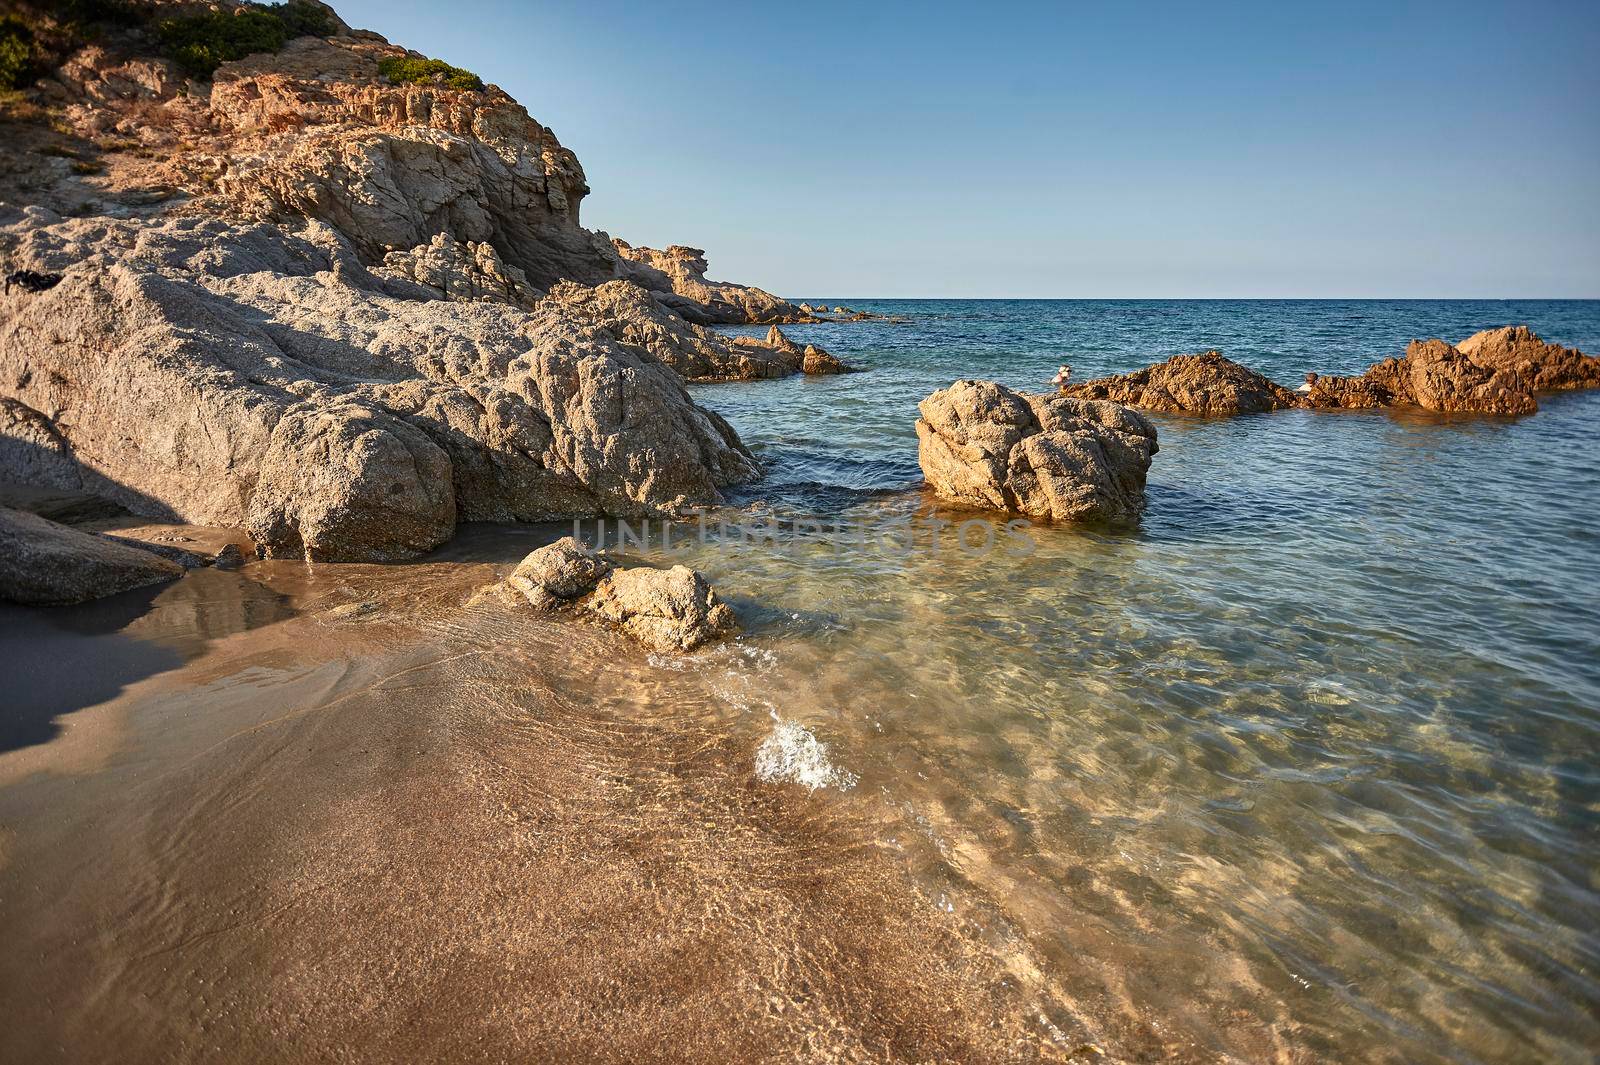 The place where the great rocks of the Sardinian coast meet the crystalline sea during a summer sunset.